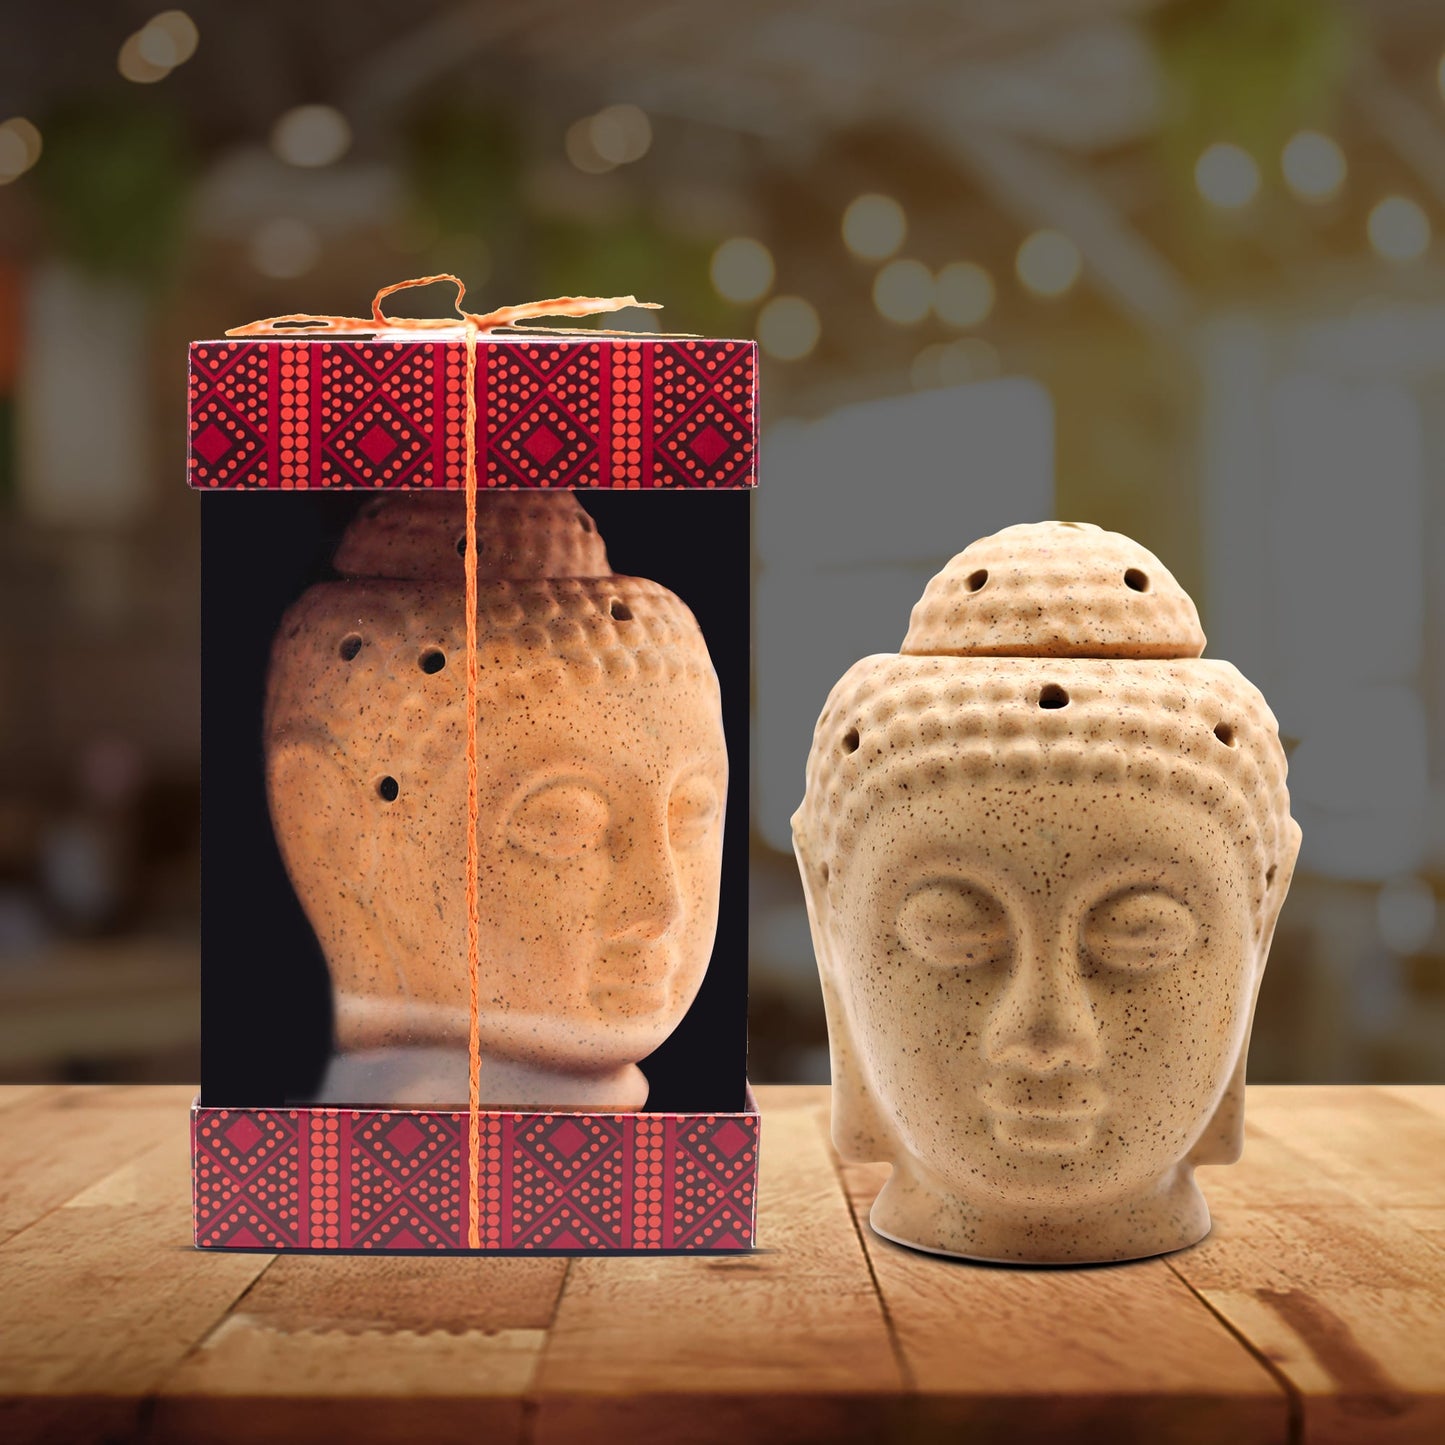 AuraDecor Buddha Electric Gift Set with Aroma Oil 10ml Aroma Oil & 1 Extra Bulb Assorted Color